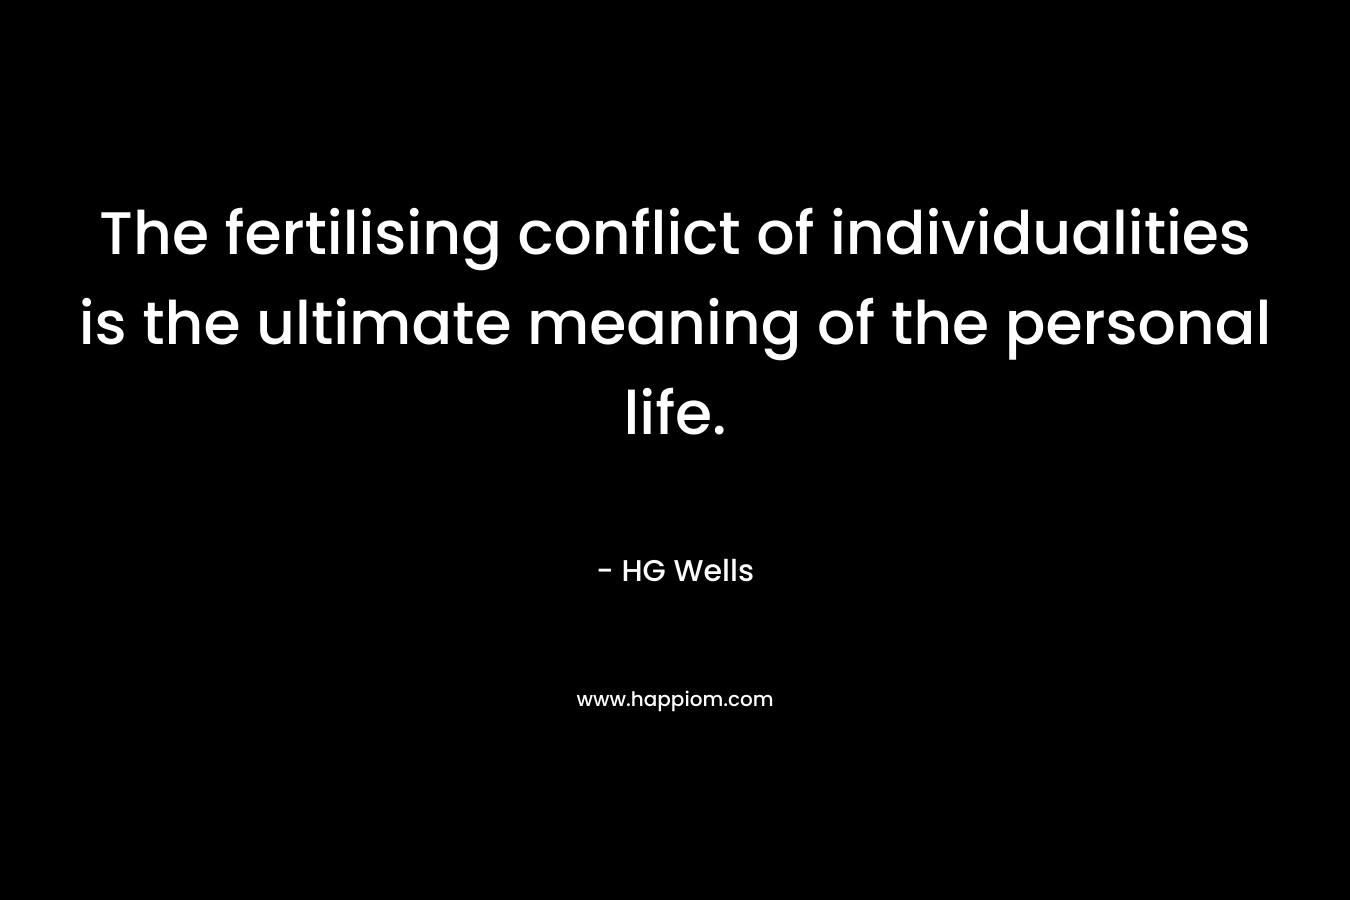 The fertilising conflict of individualities is the ultimate meaning of the personal life. – HG Wells